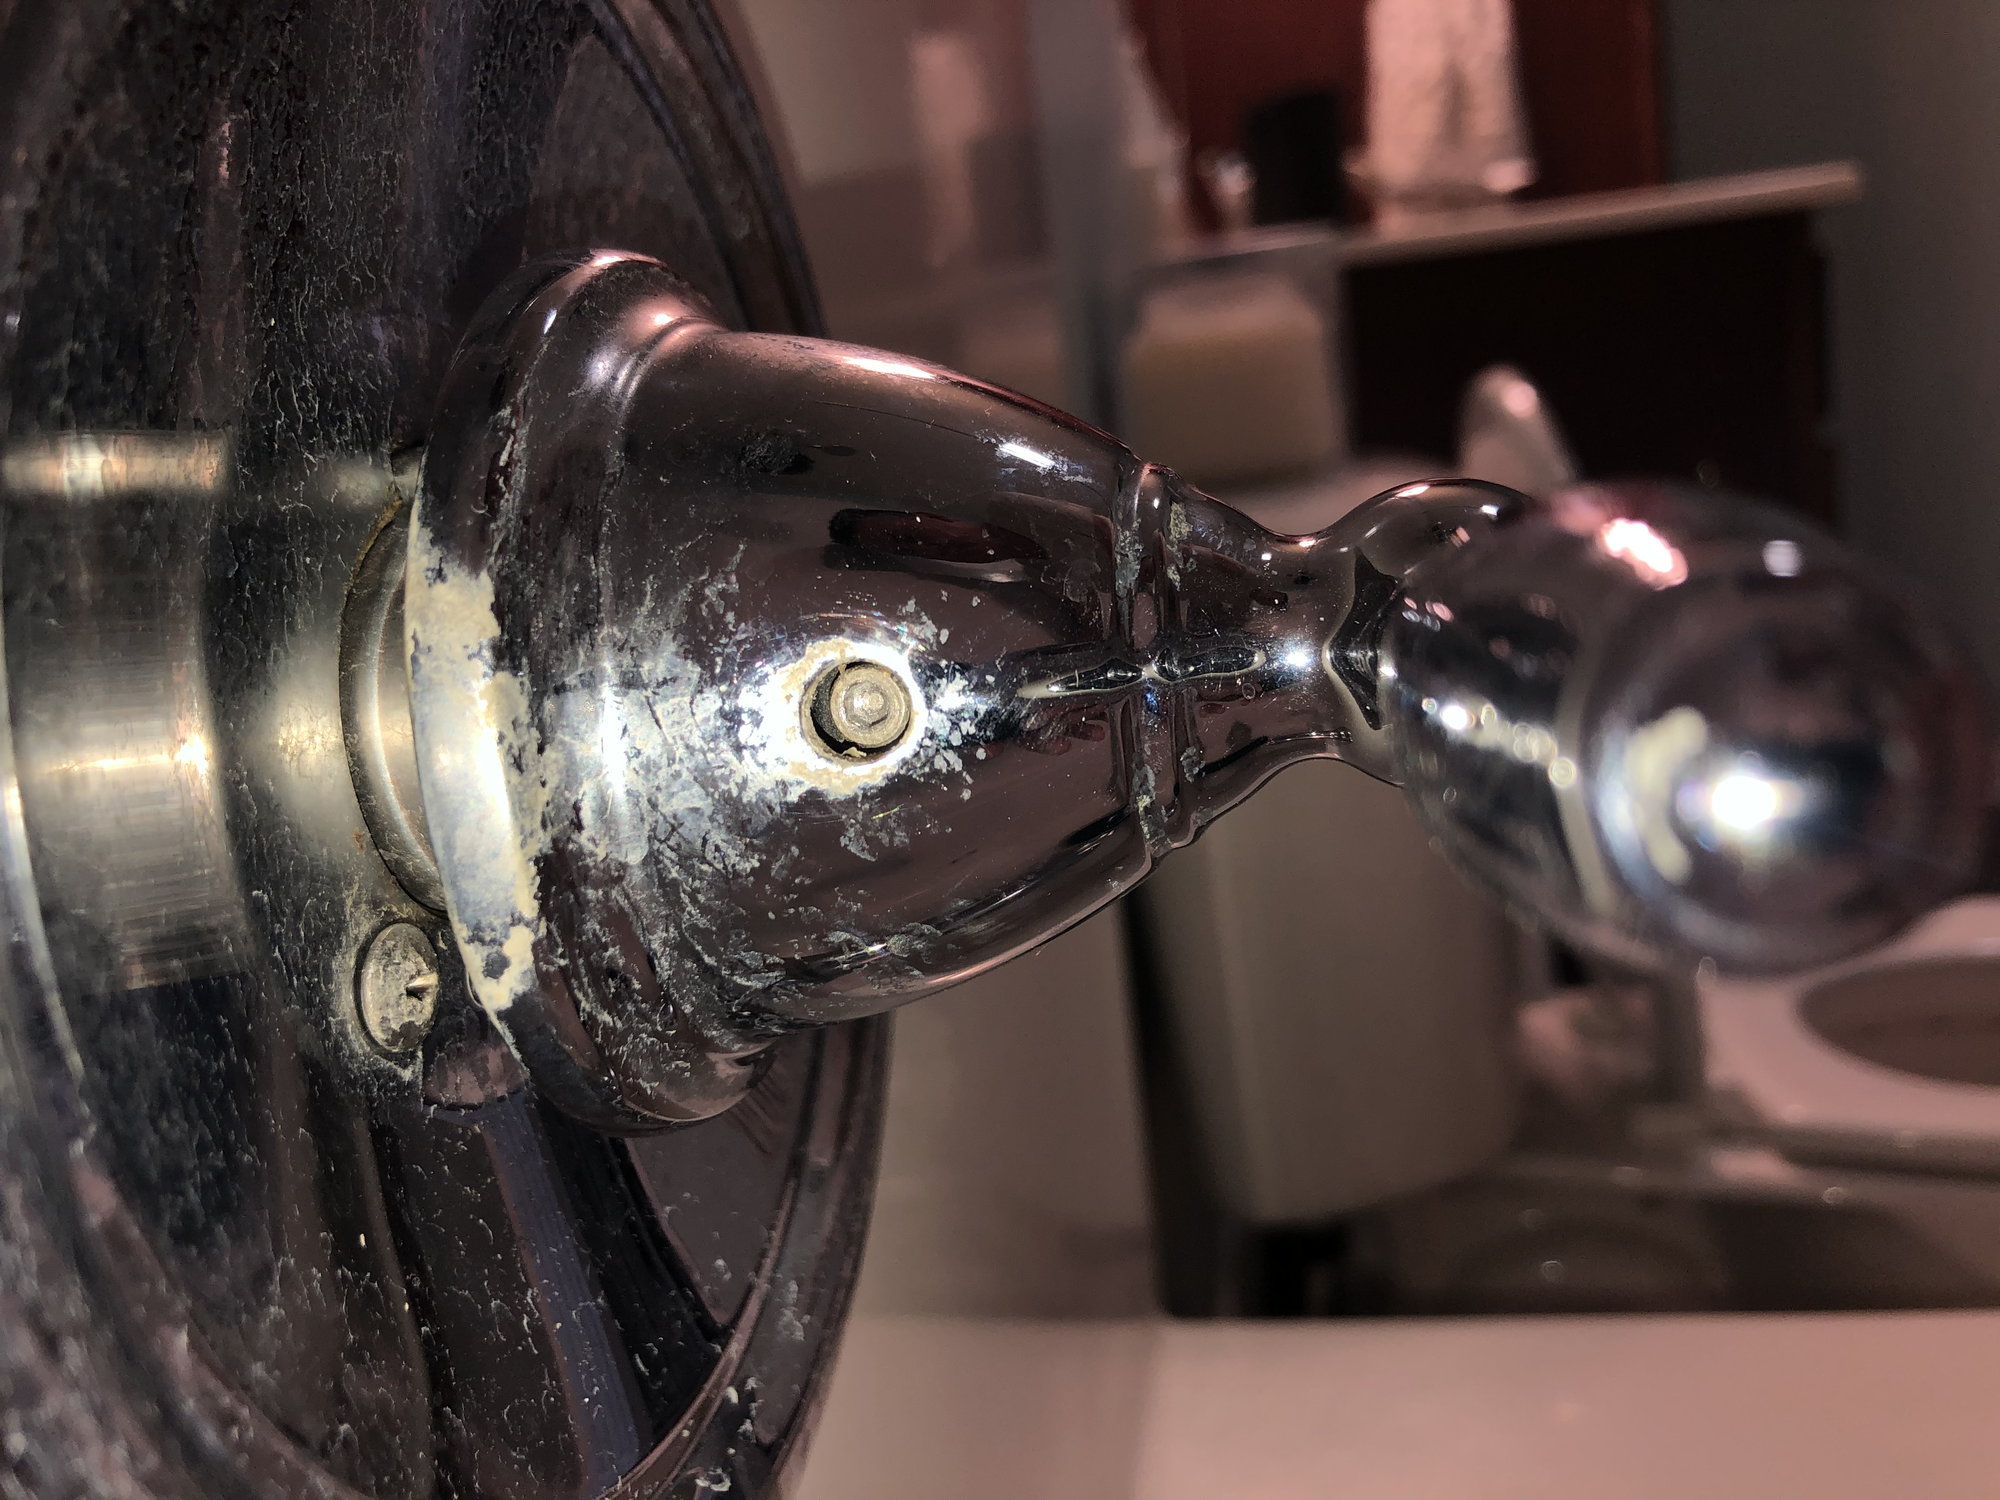 How To Take Apart A Bathroom Faucet Head - HOW TO DISASSEMBLE A BATHROOM FAUCET